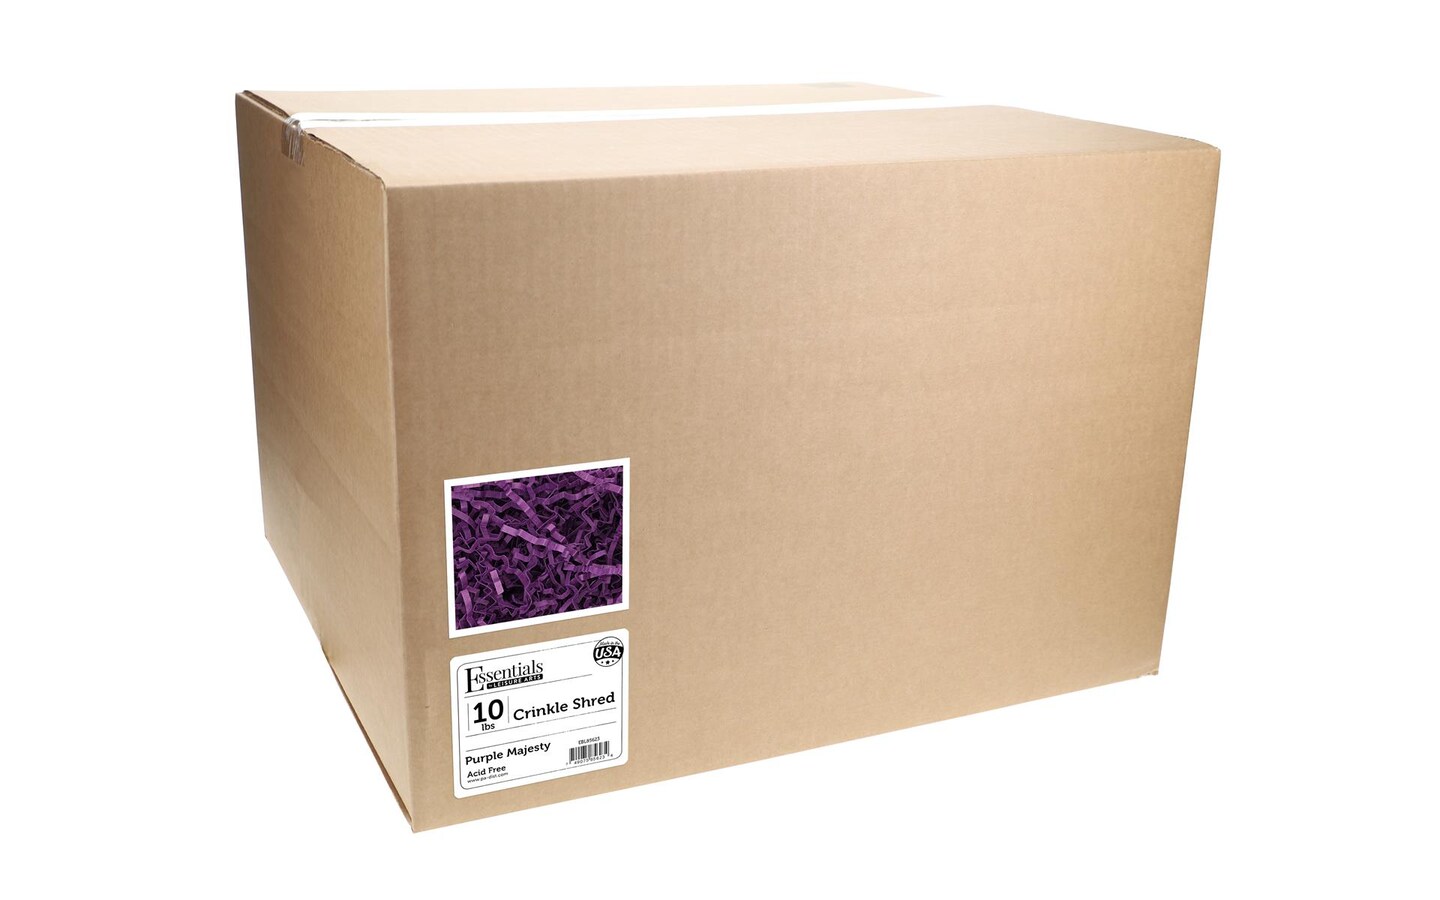 Essentials by Leisure Arts Crinkle Shred Box, Purple Majesty, 10lbs Shredded Paper Filler, Crinkle Cut Paper Shred Filler, Box Filler, Shredded Paper for Gift Box, Paper Crinkle Filler, Box Filling